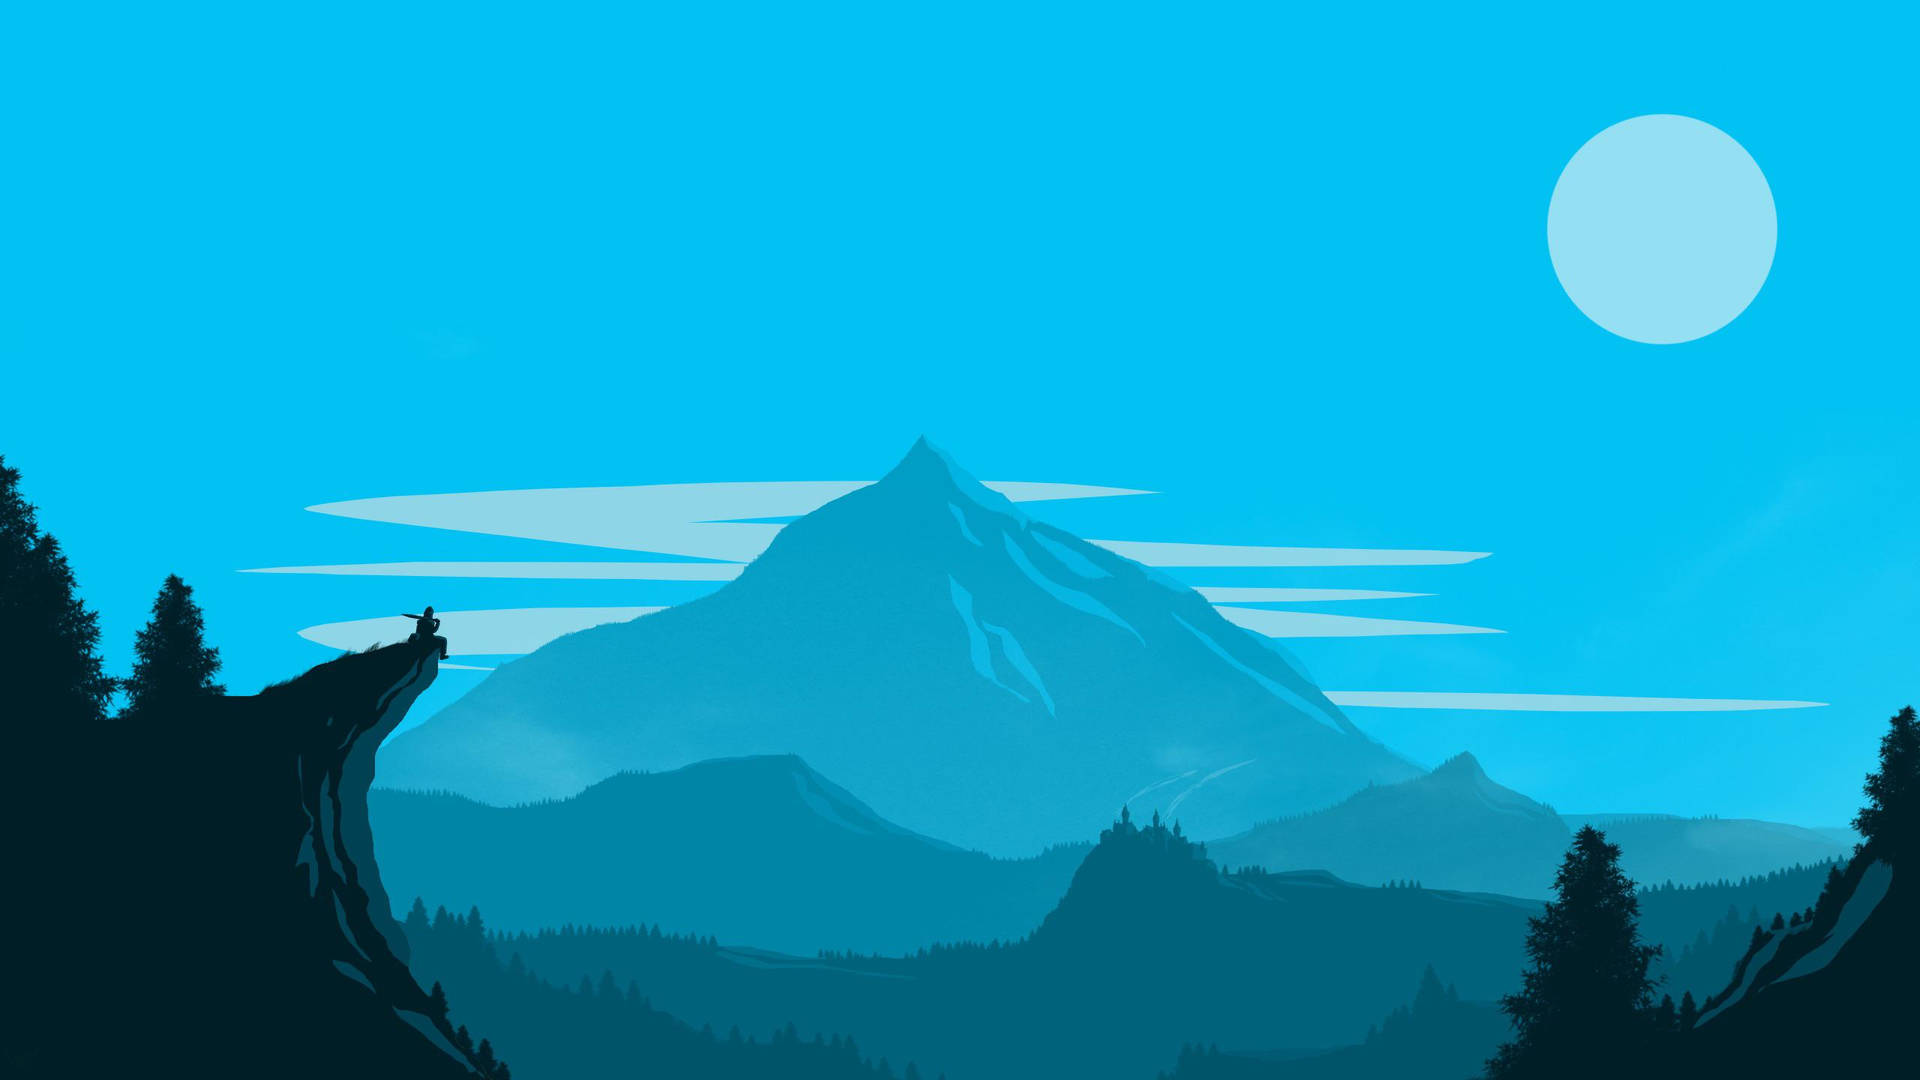 Cyan Mountain And Moon Illustration Background